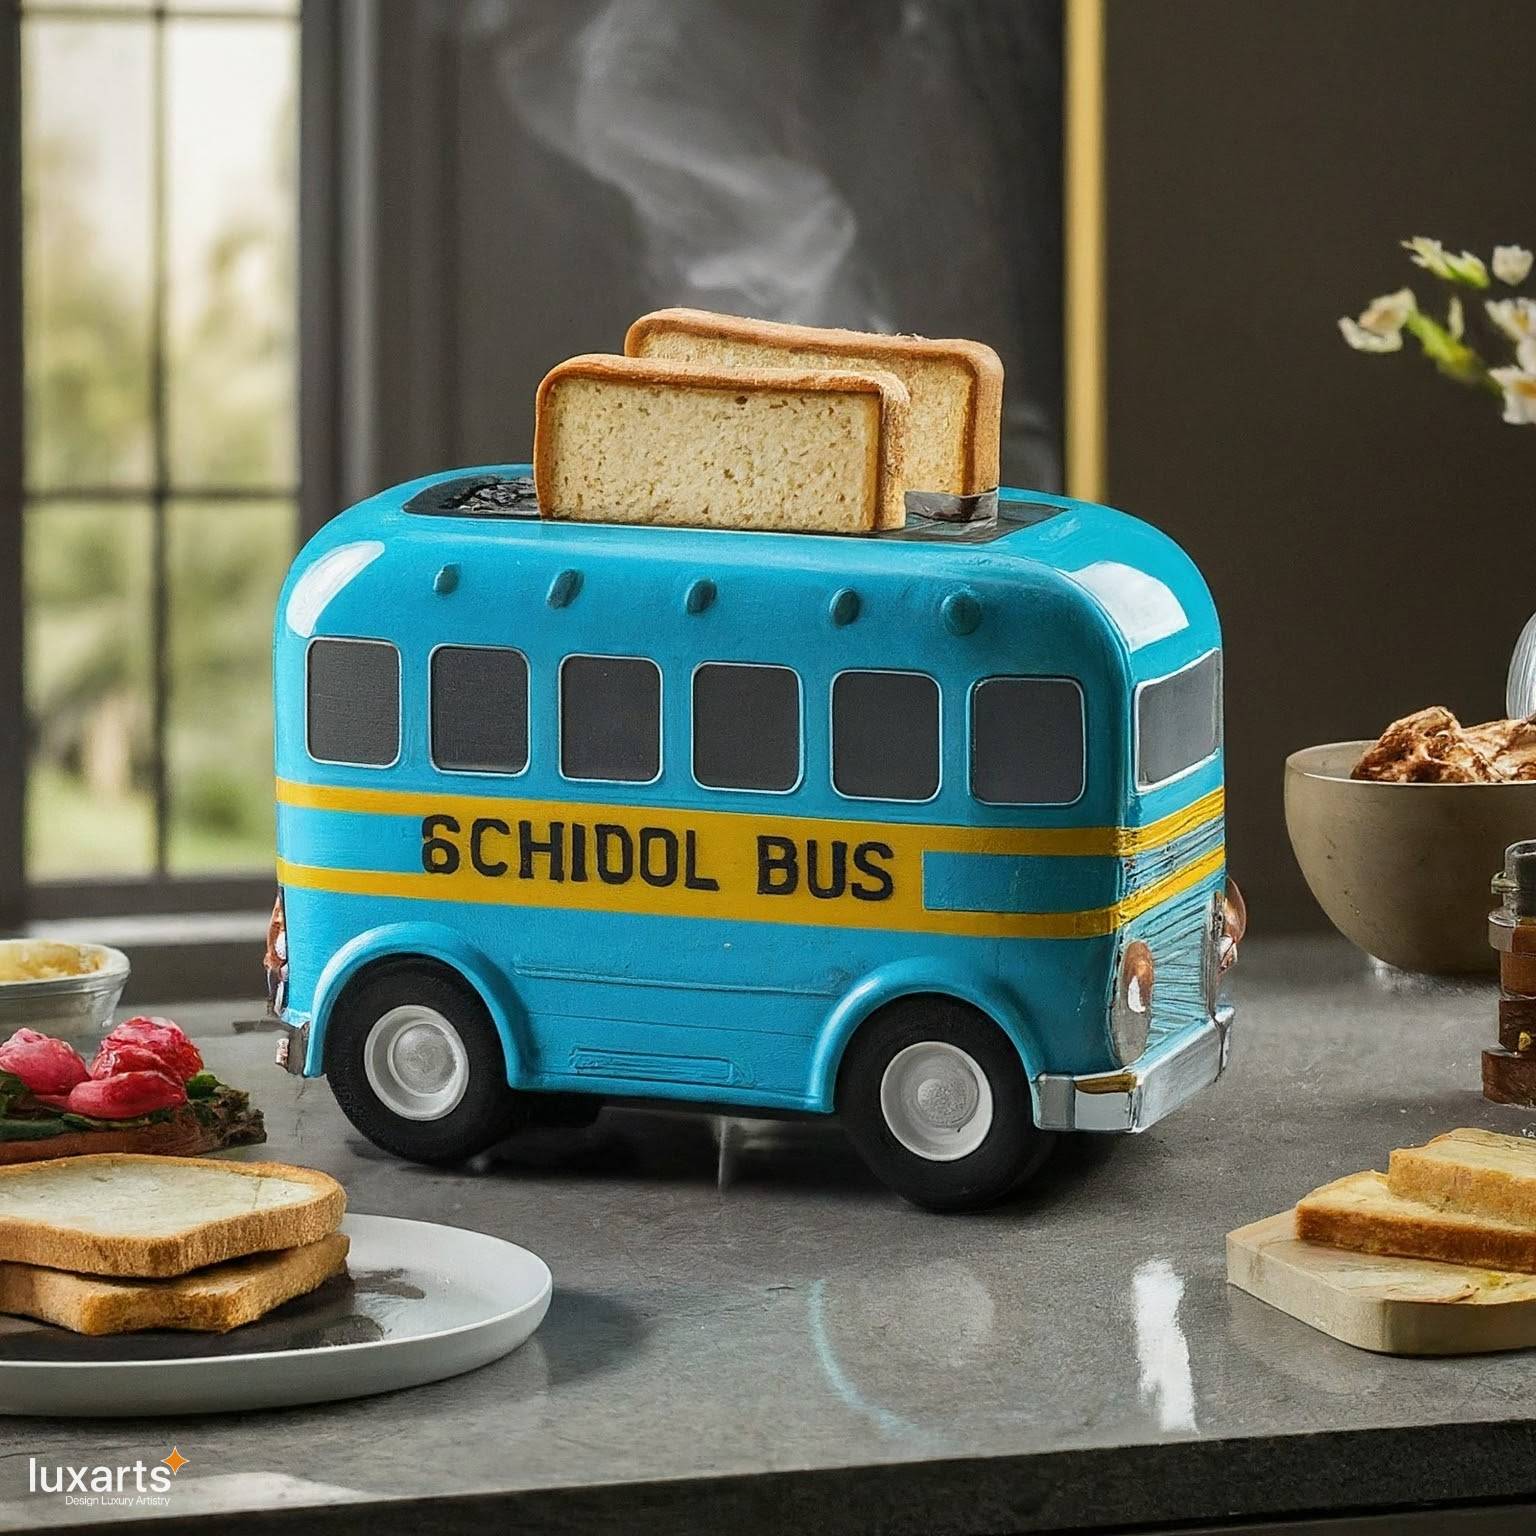 School Bus Shaped Toaster: Adding Fun to Breakfast Time luxarts school bus toaster 6